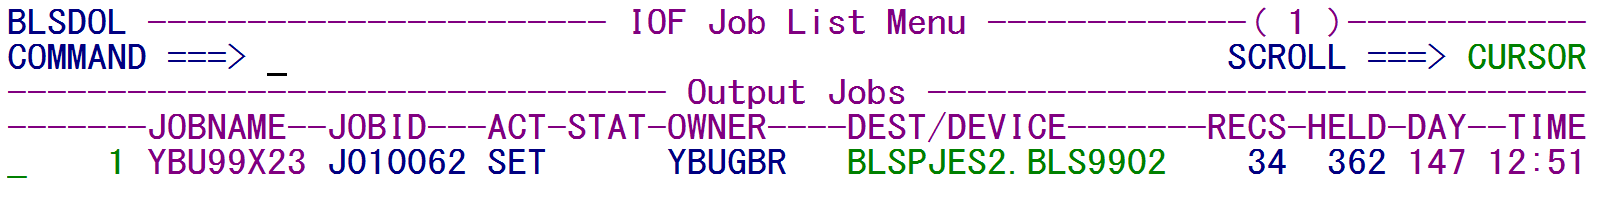 040 - output jobs.png